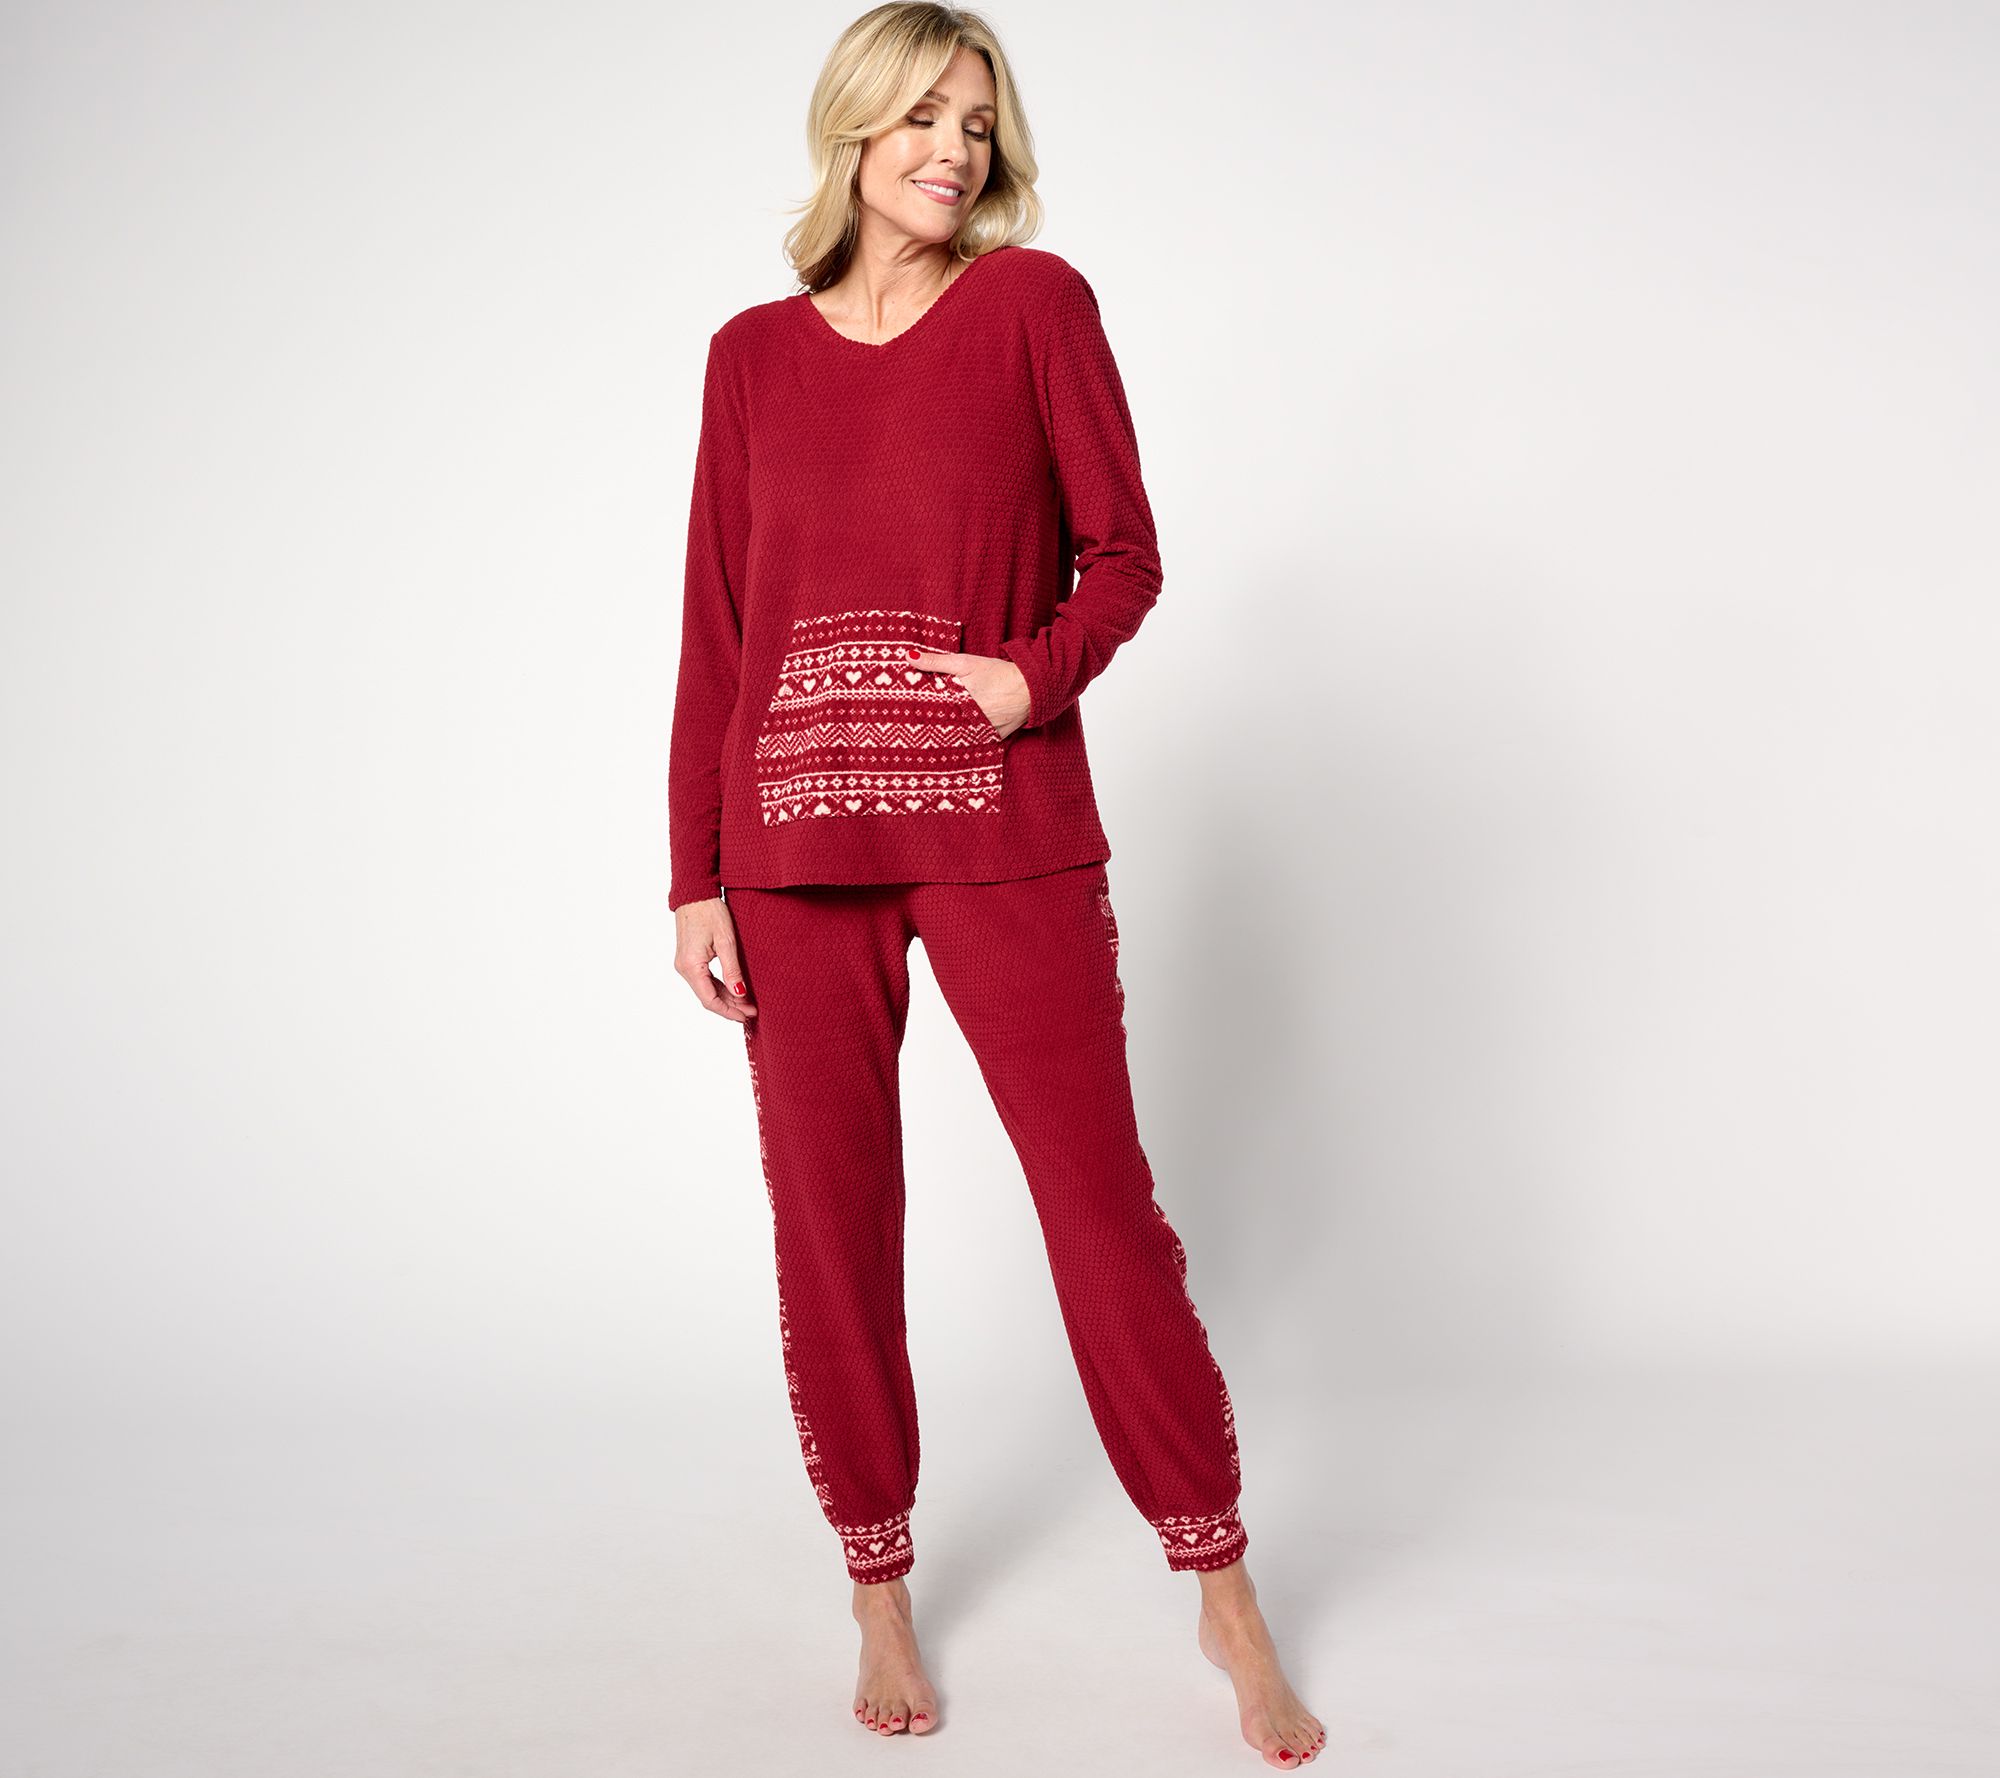 Shop Great Cuddl Duds Comfort Clothing For Mother's Day